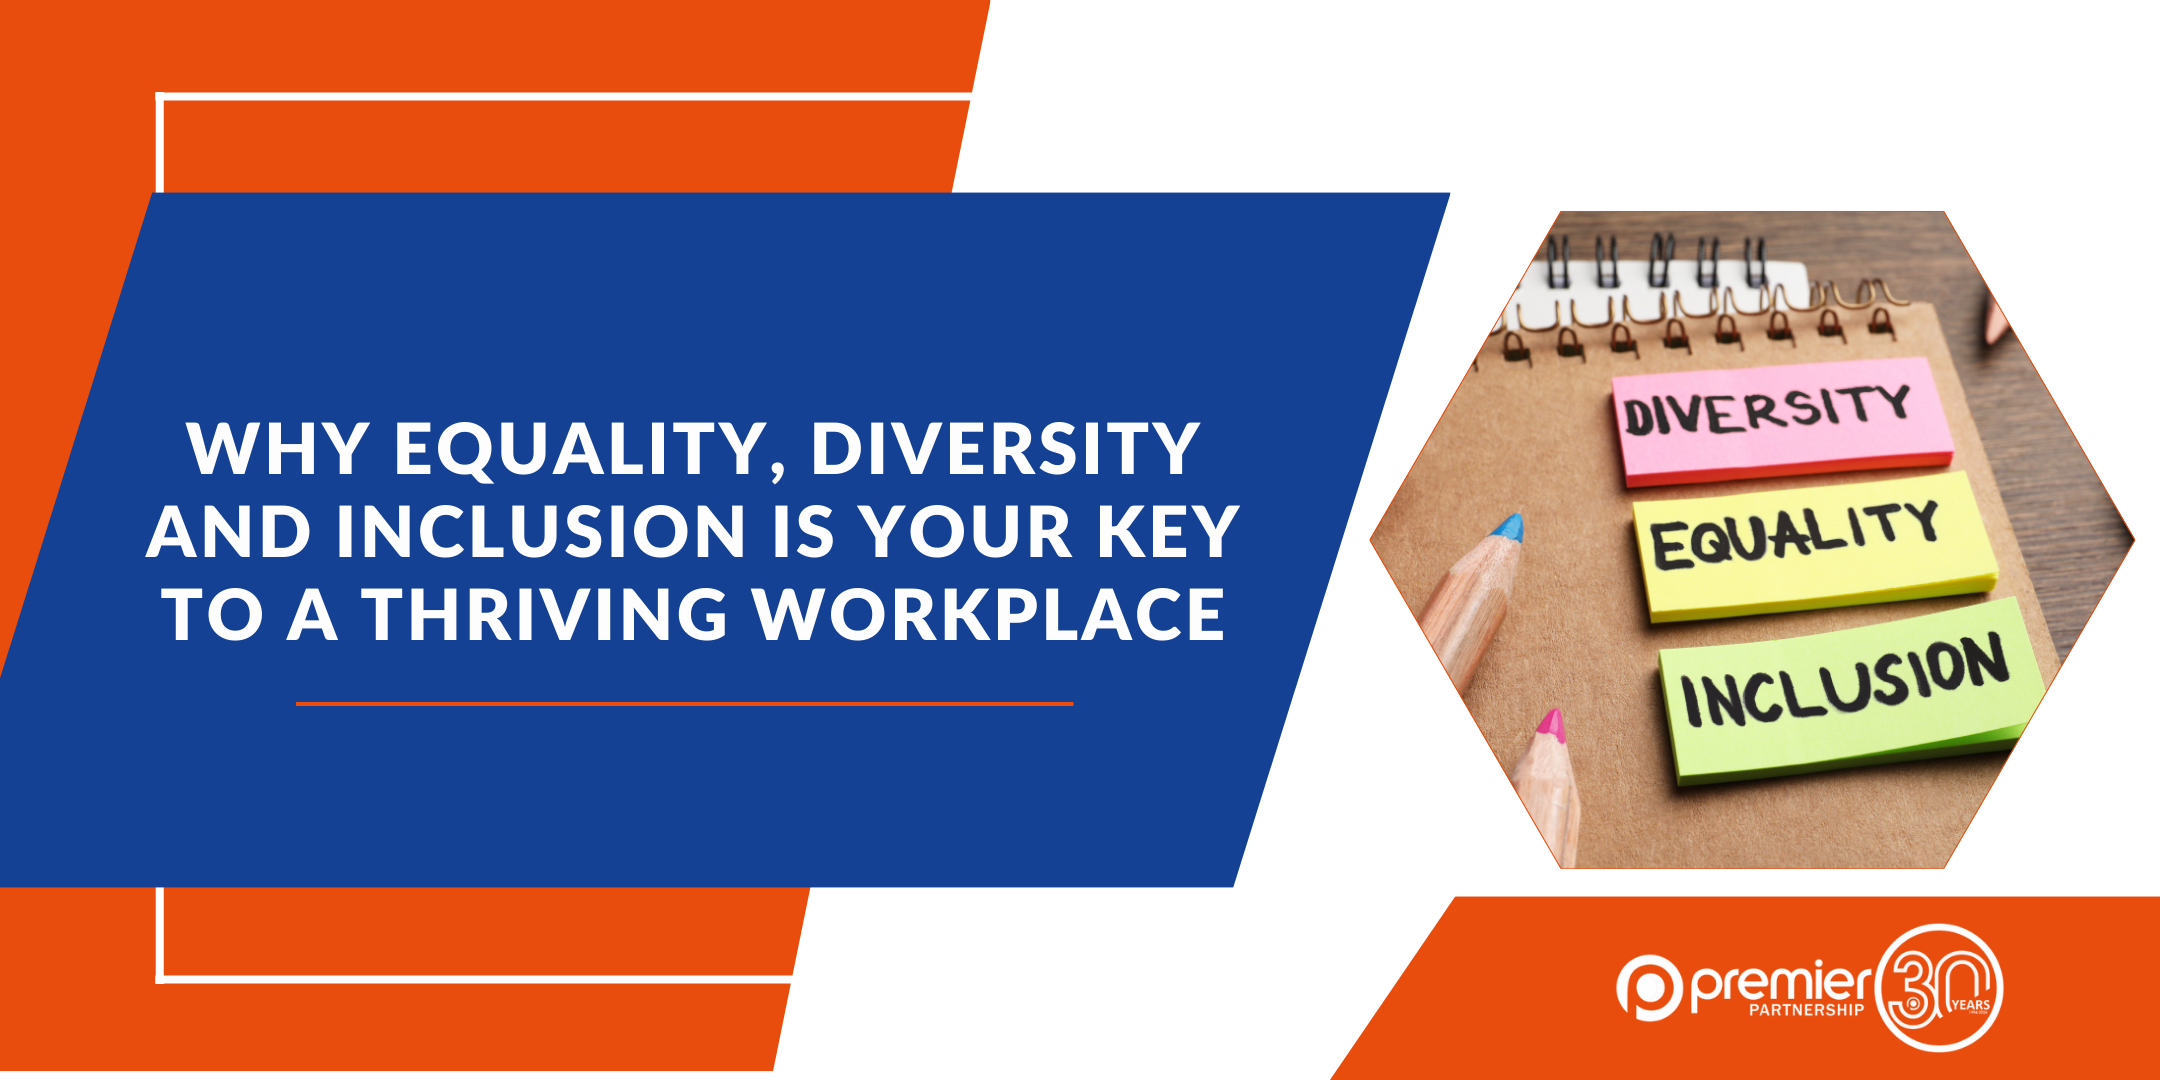 Why Equality, Diversity and Inclusion is Your Key to a Thriving Workplace